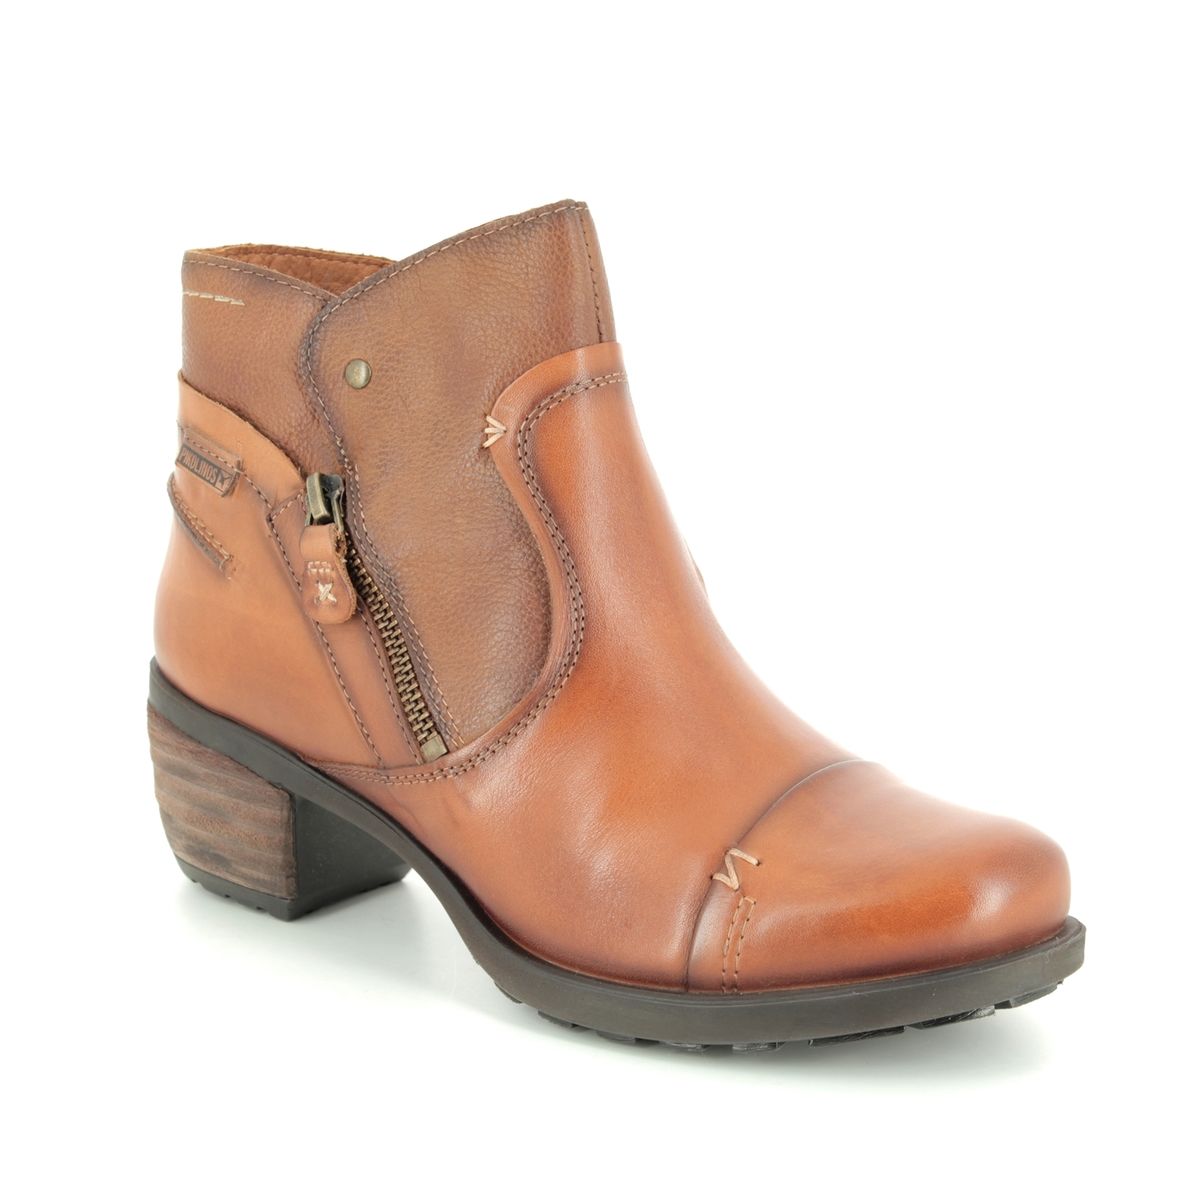 Pikolinos Le Mans 8388991-11 Tan Leather Ankle Boots